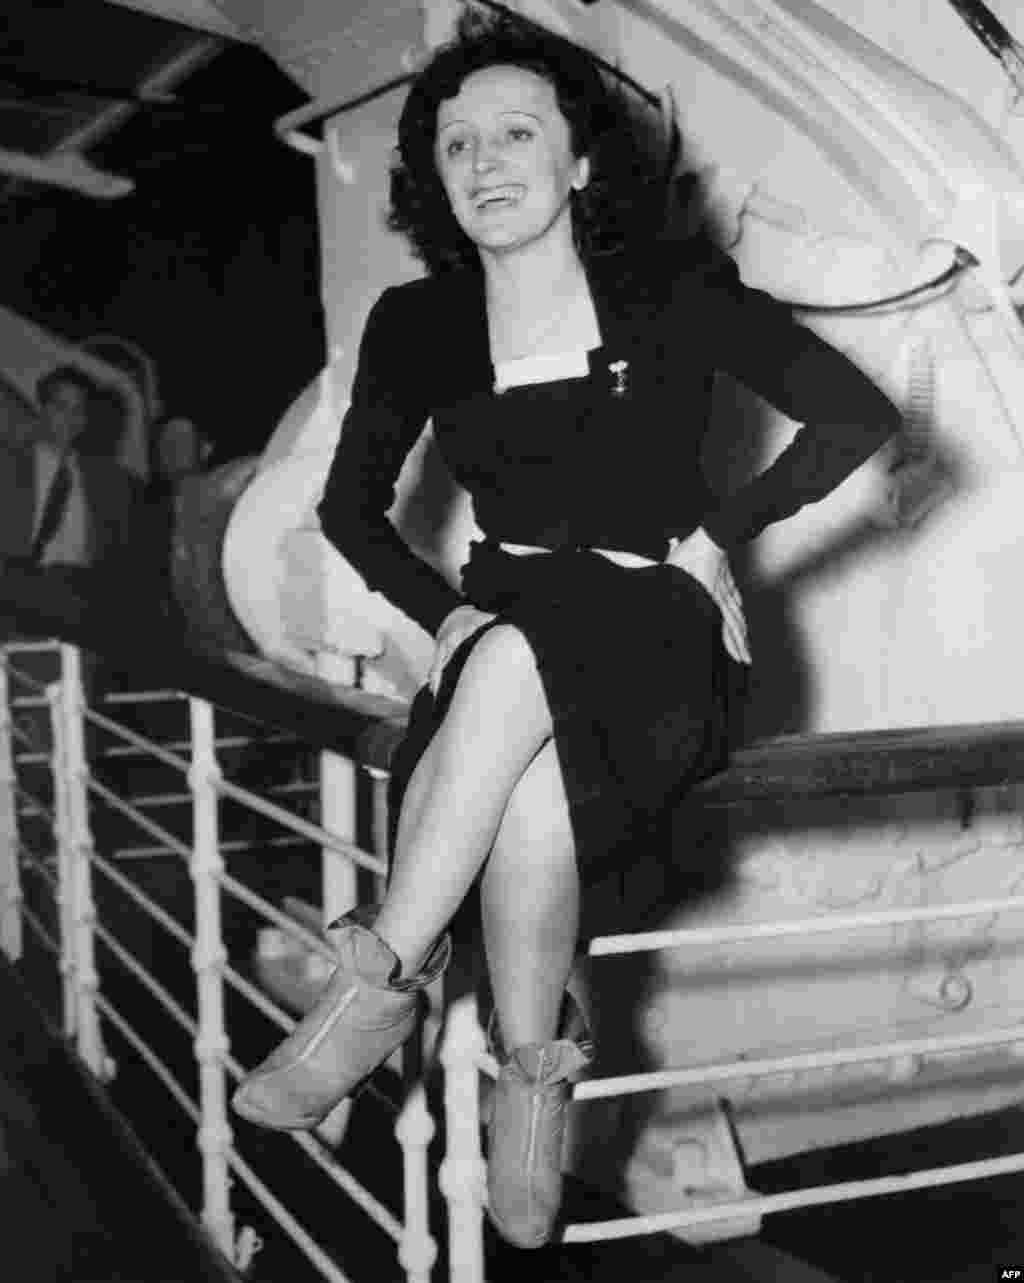 Piaf poses for photographers on October 18, 1947 upon her arrival in New York aboard the "De Grasse."